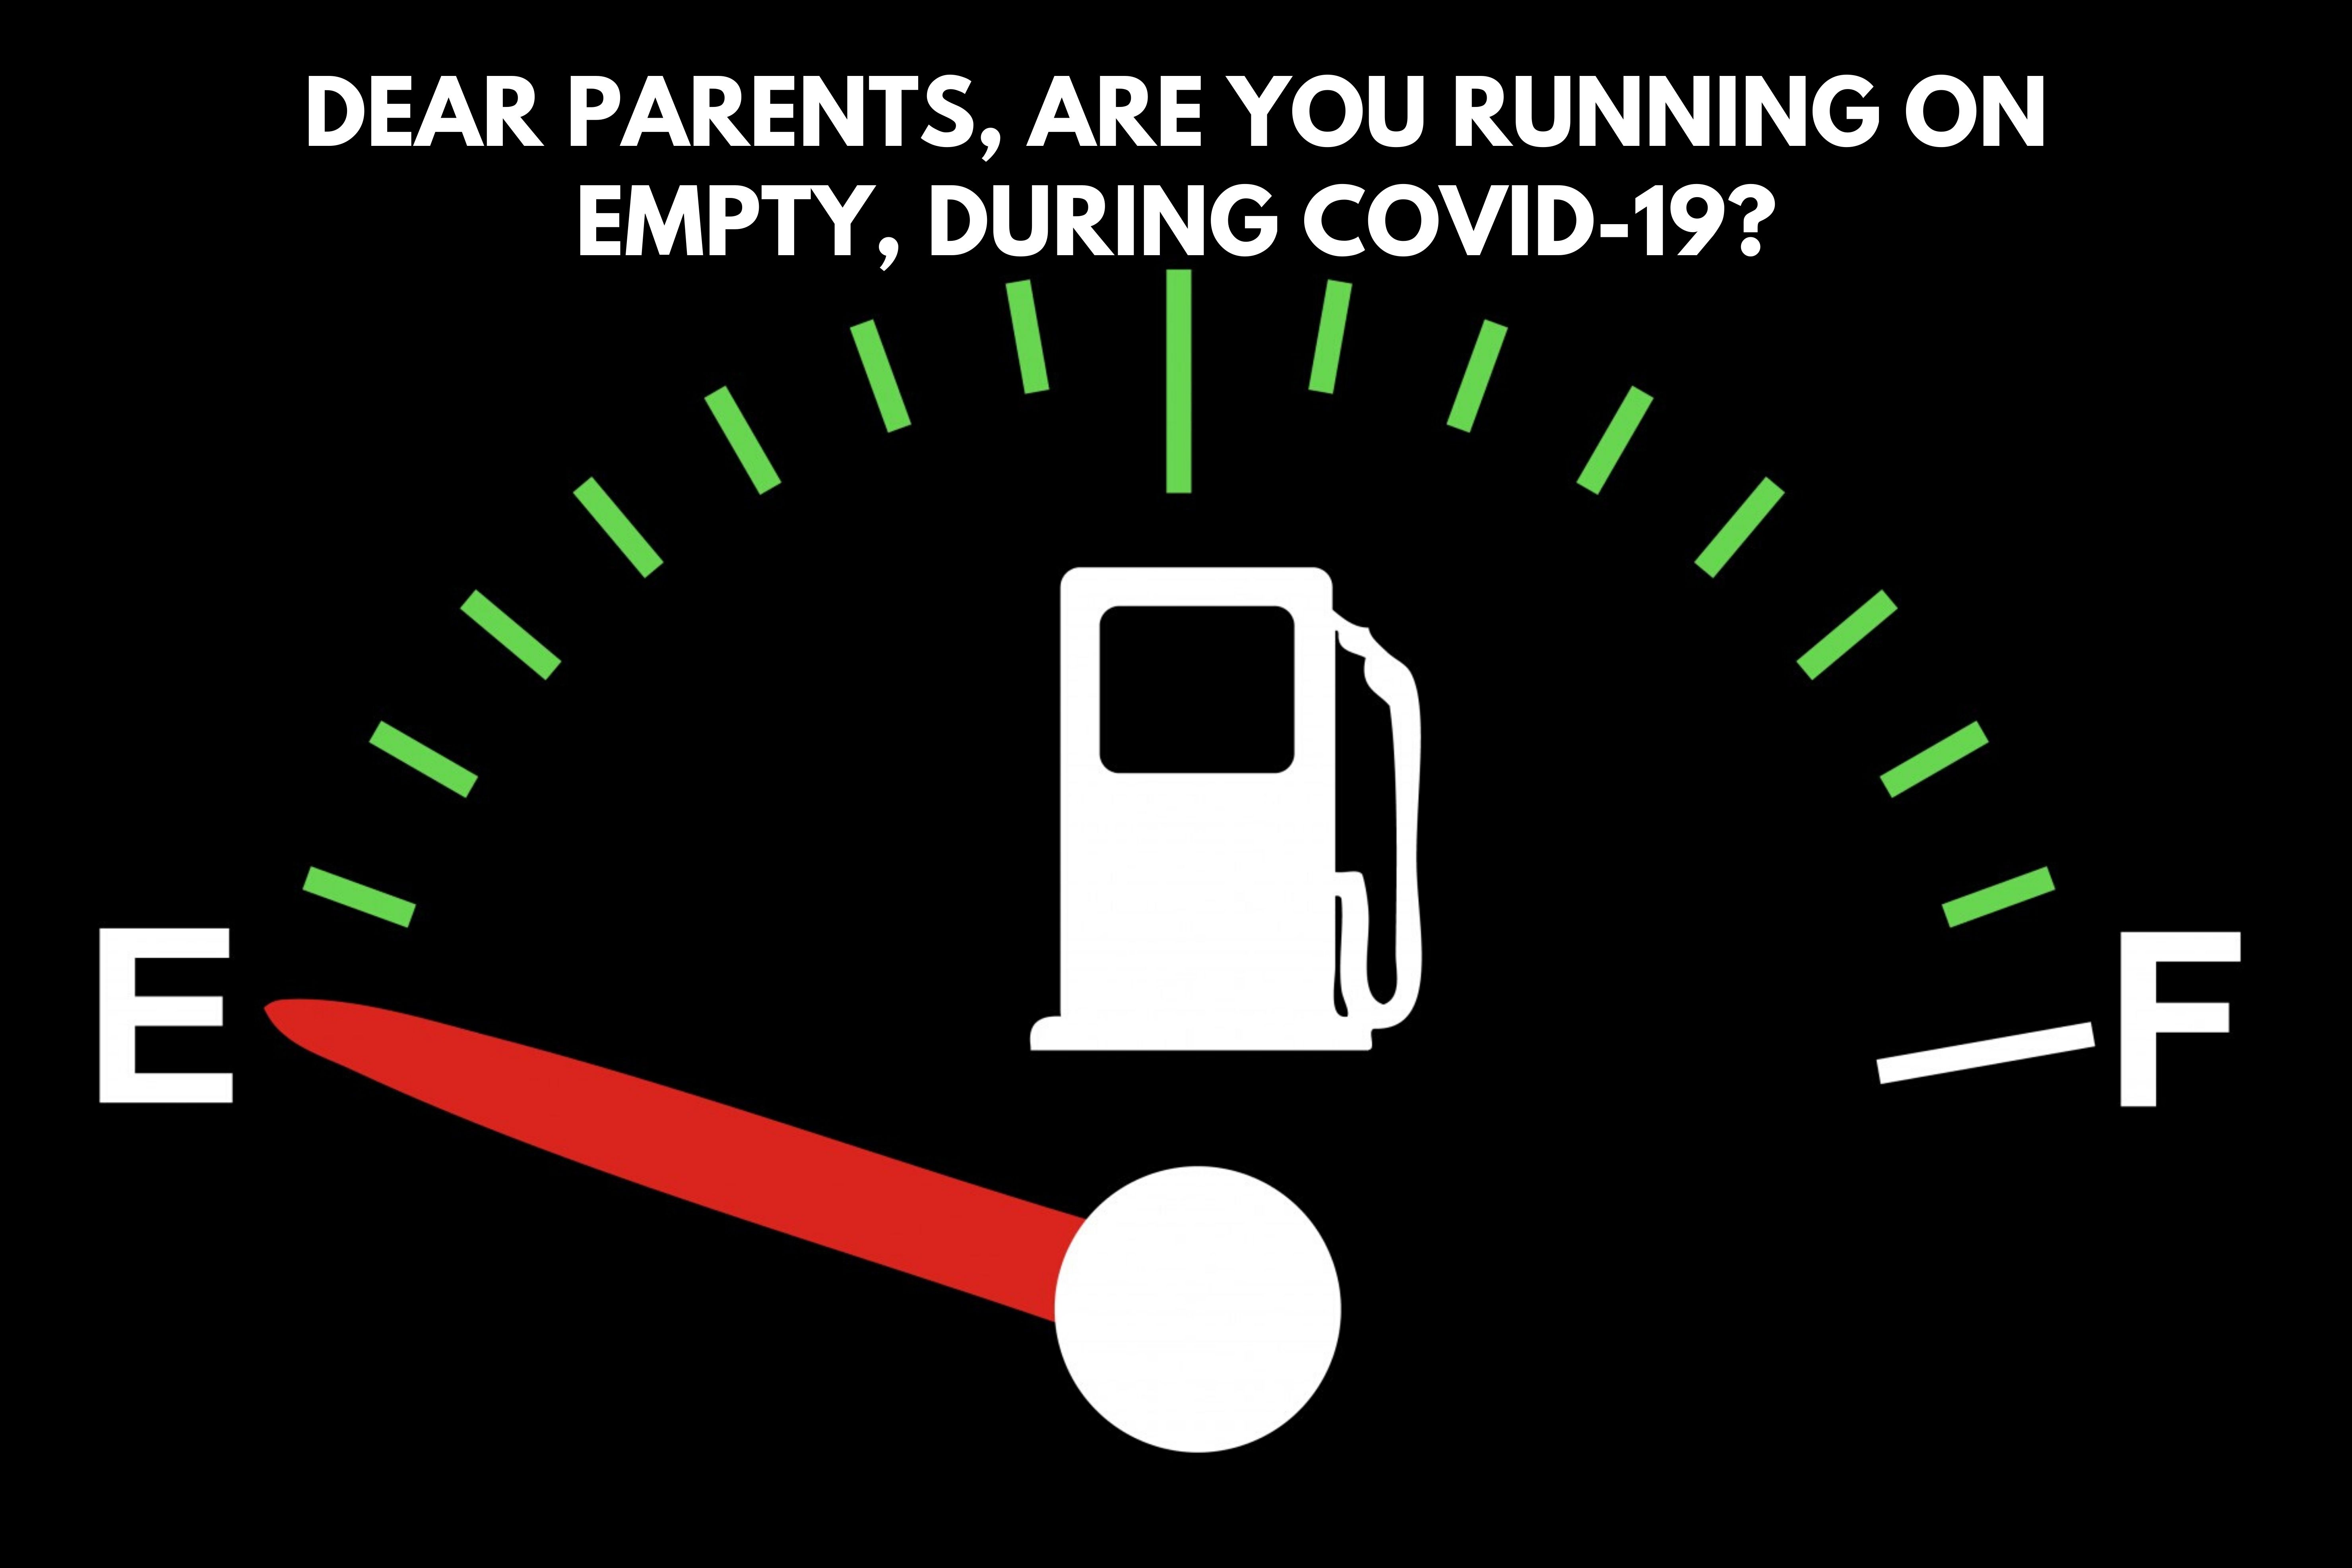 Dear parents, are you running on empty during COVID-19?